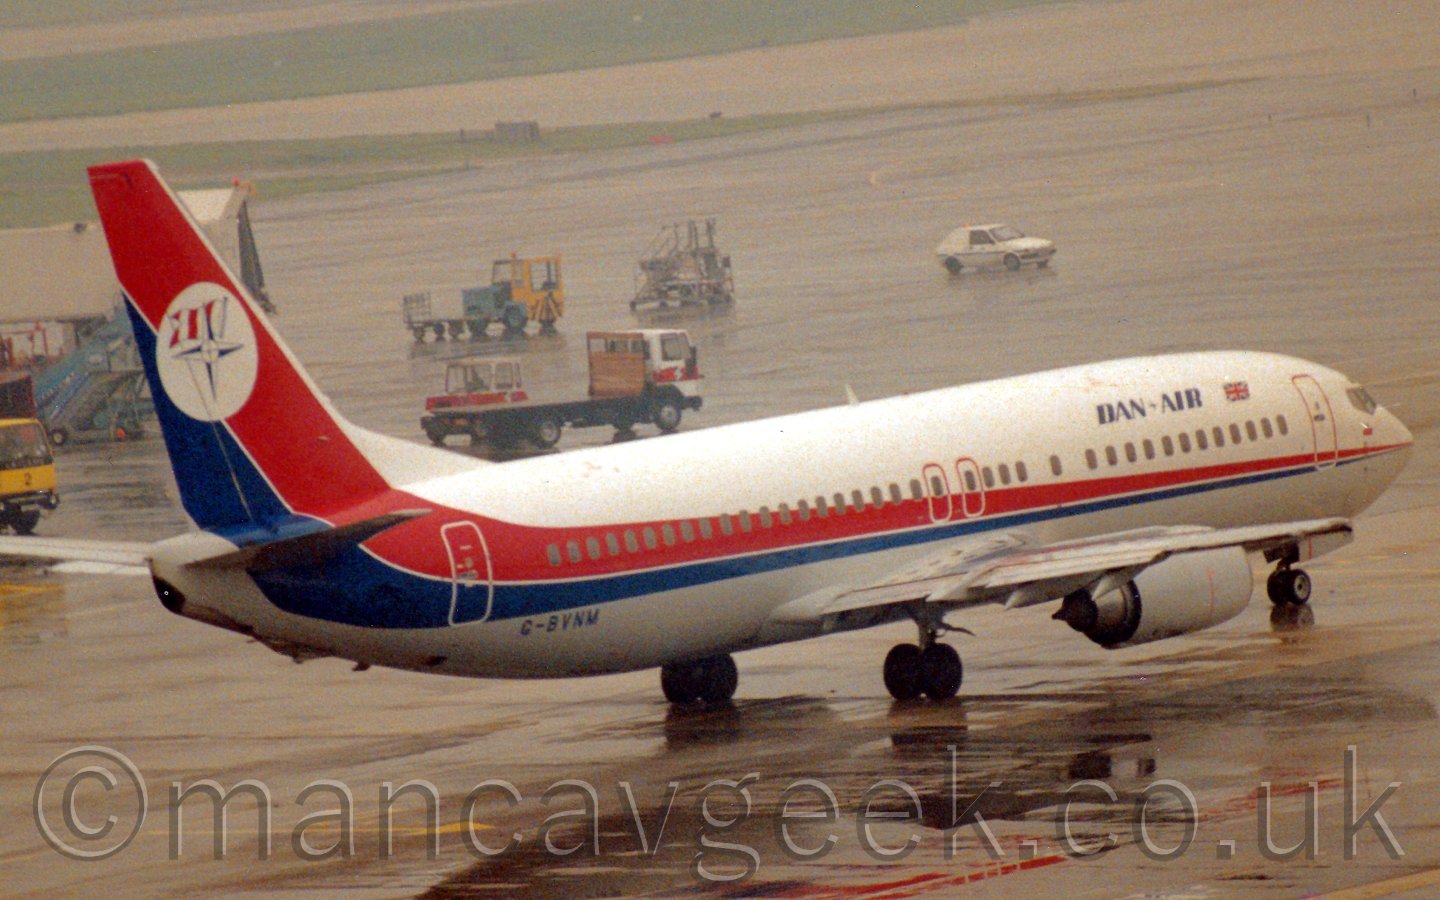 Side view of a white, blue, and red twin engined jet airliner taxiing from left to right on a rainy day, with lots of puddles creating reflections on the ground.